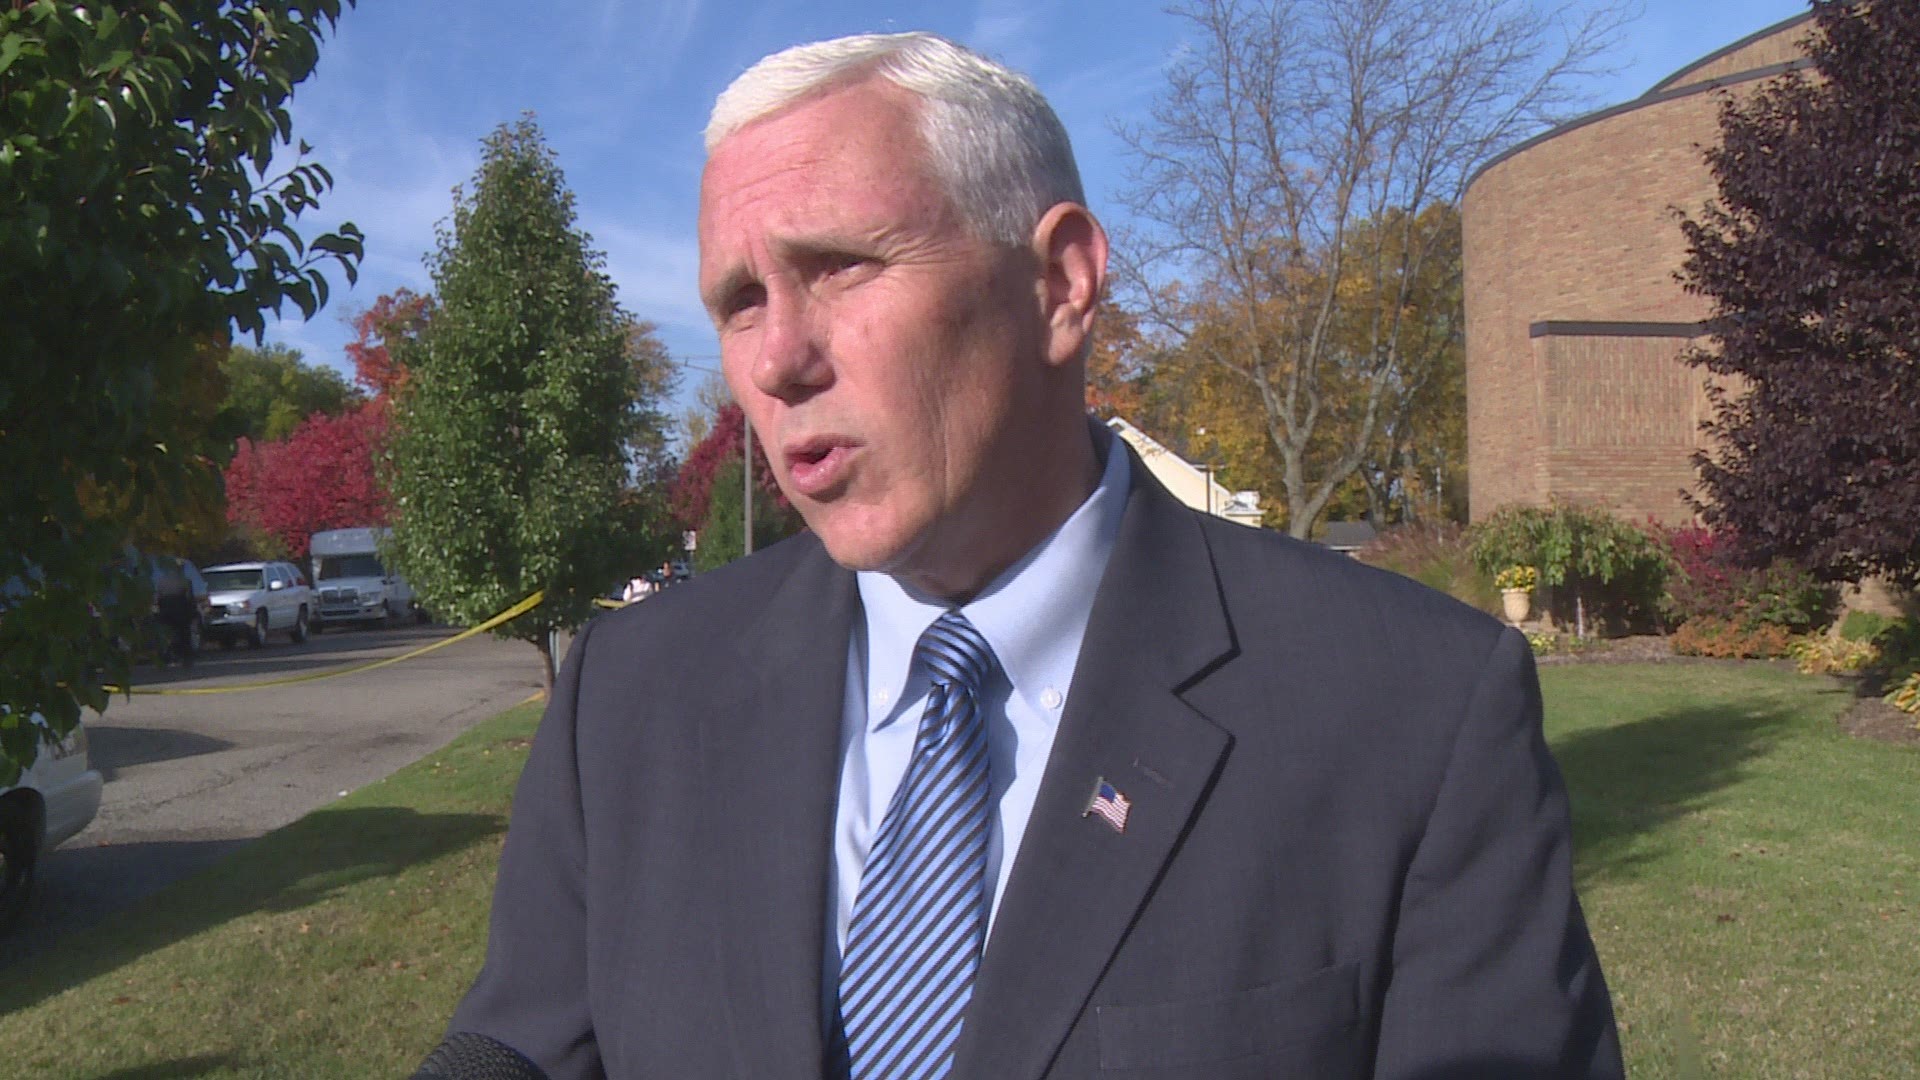 WZZM 13's Nina DeSarro talks with Republican presidential candidate Mike Pence.